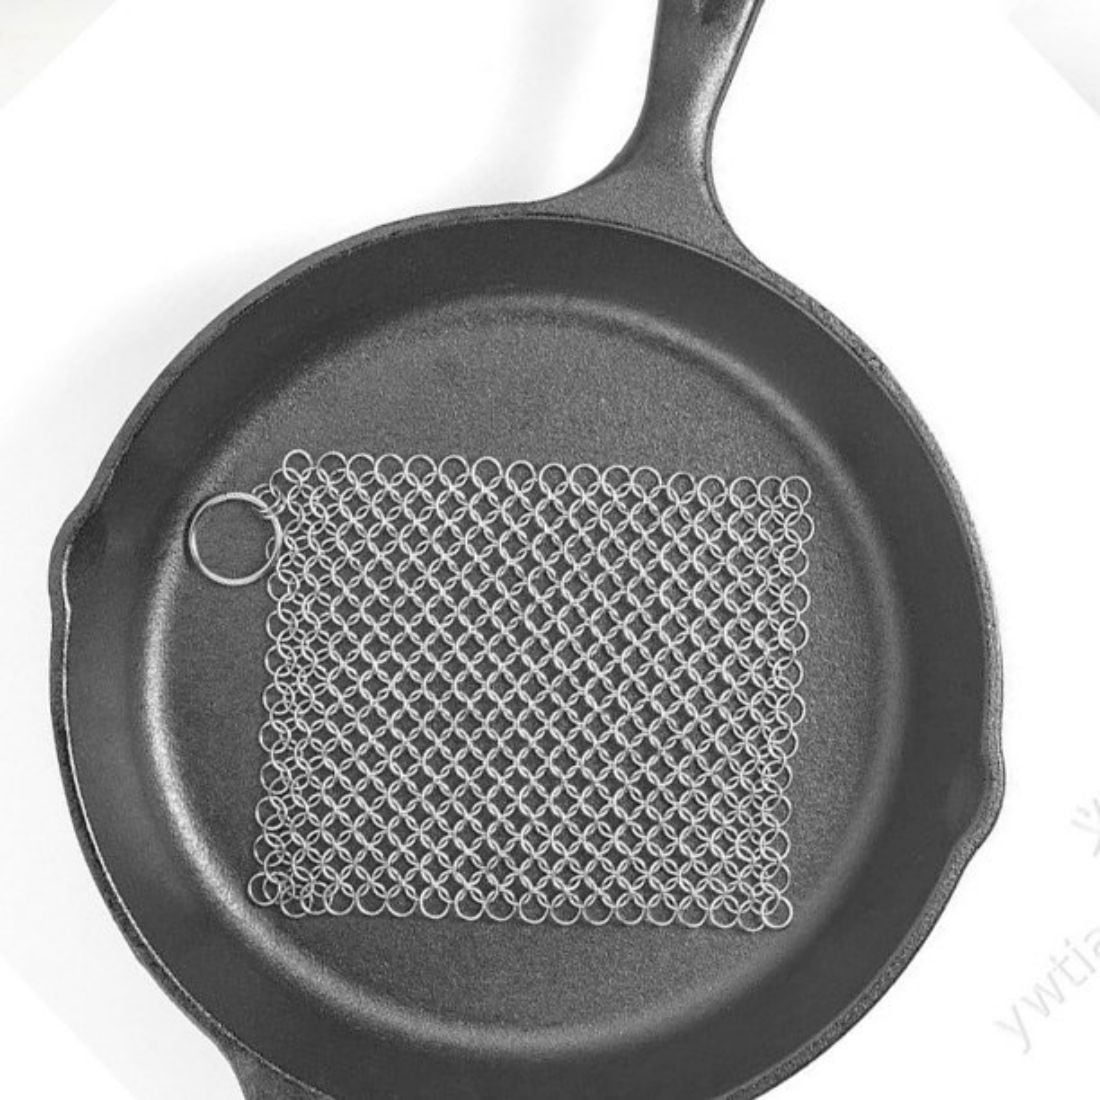 Bunhut Cast Iron Skillet Cleaner Scrubber Upgraded 316 Stainless